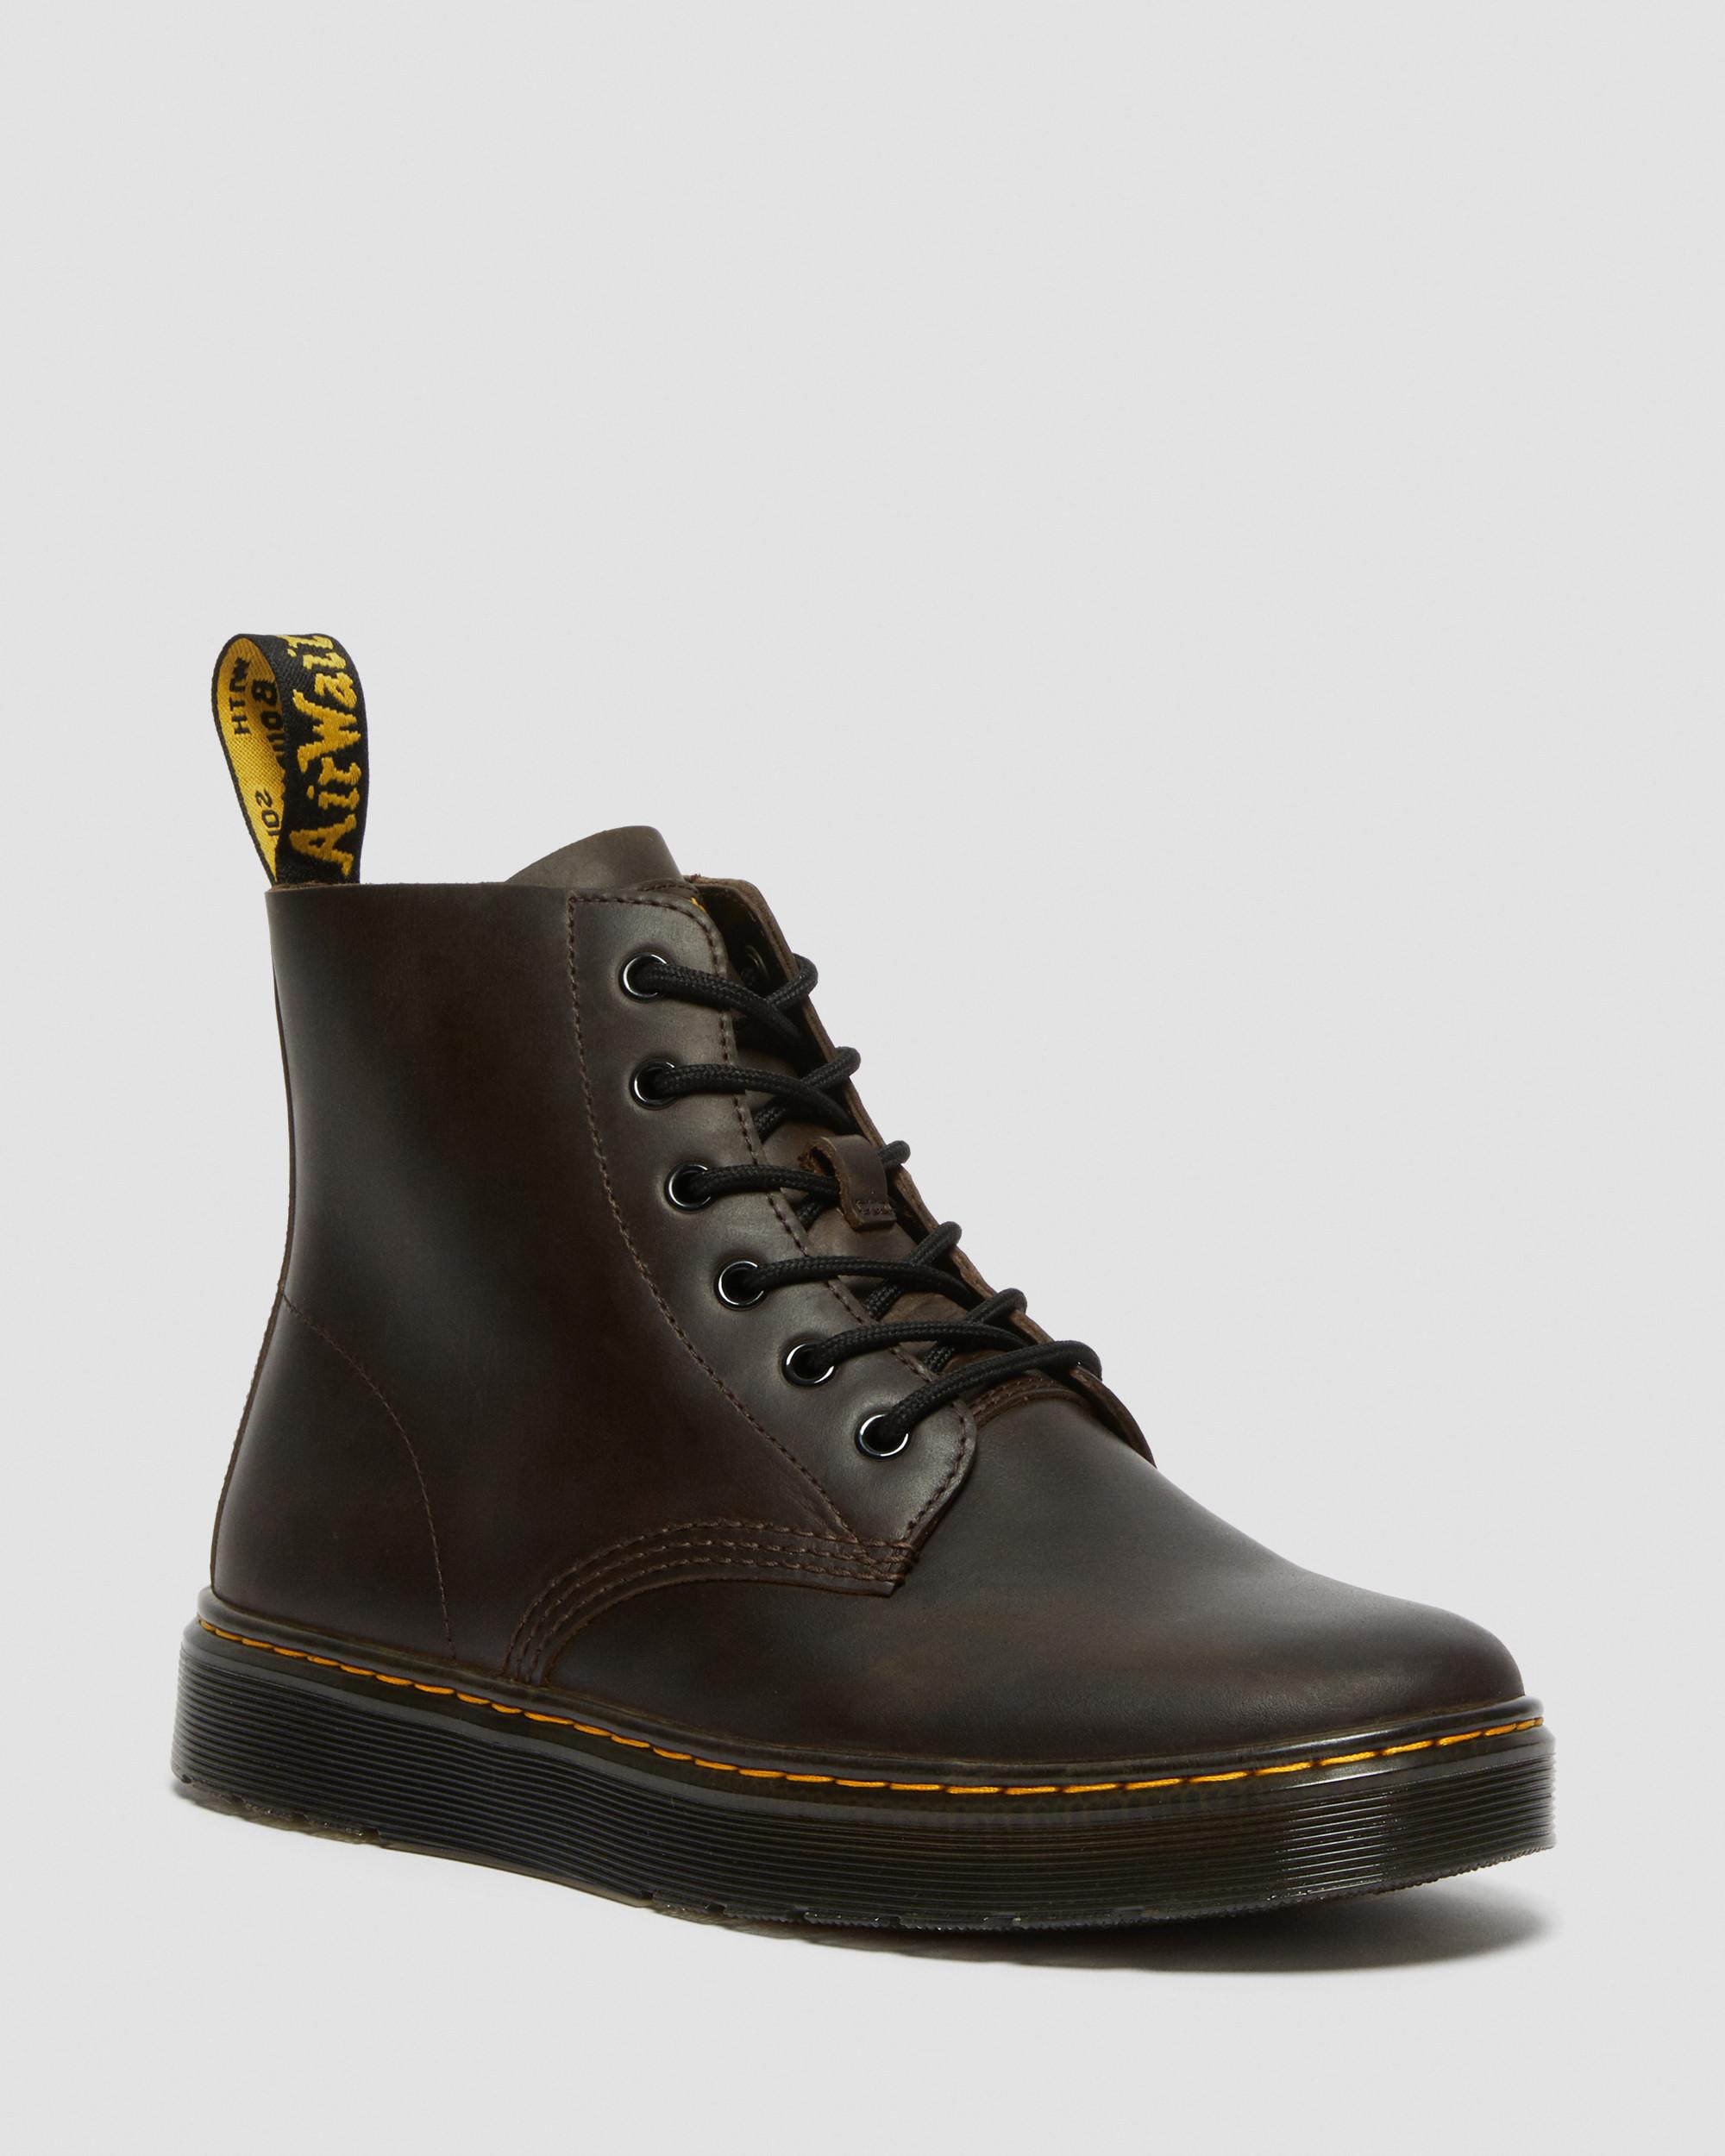 Thurston Crazy Horse Leather Chukka Boots in Dark Brown